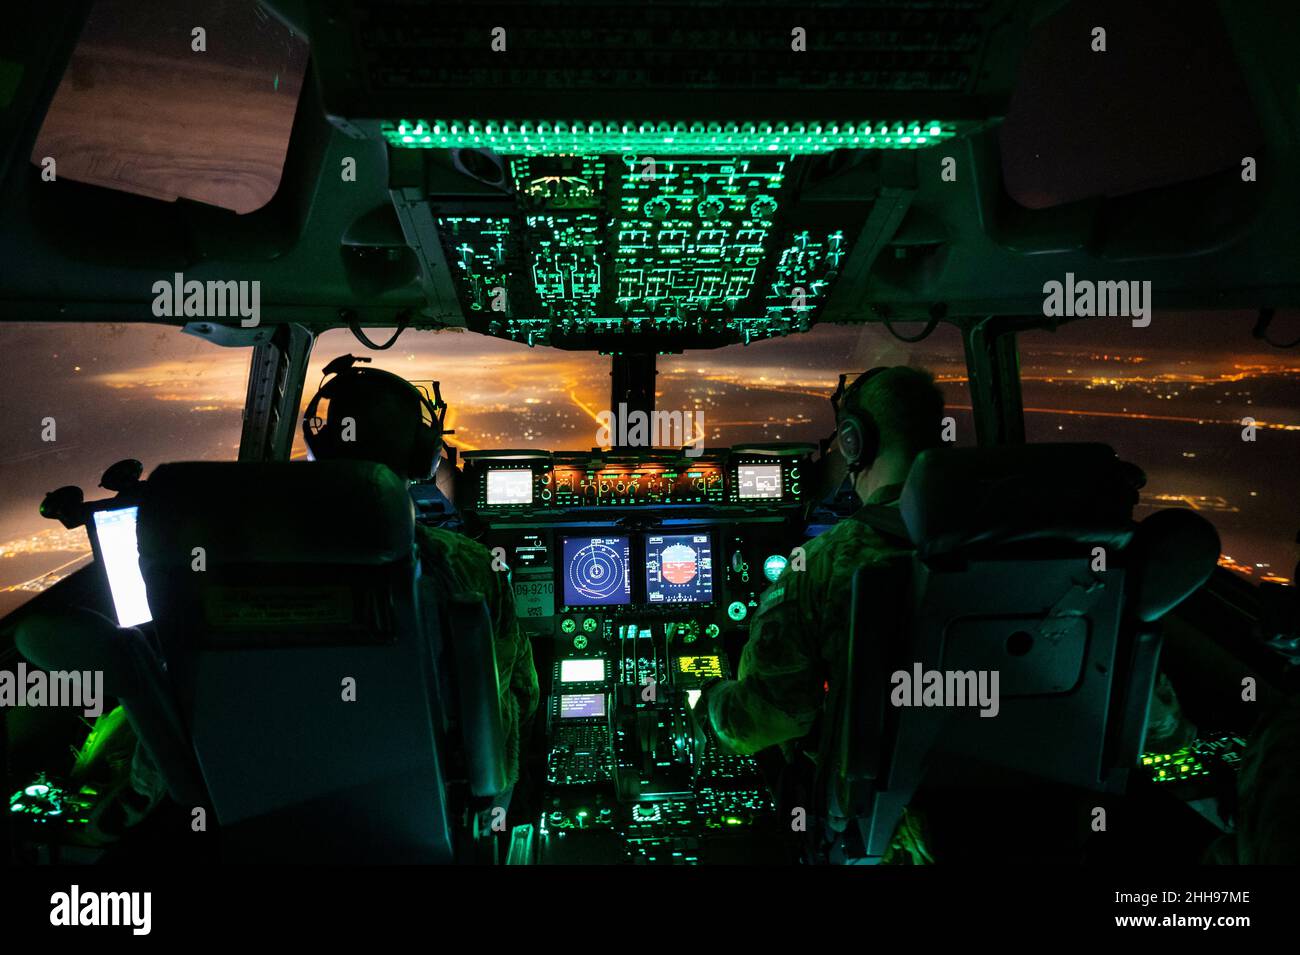 United States Air Force Captain Eric Pham, left, and US Air Force 1st Lieutenant Dane Butler, pilots assigned to the 816th Expeditionary Airlift Squadron, operate a US Air Force C-17 Globemaster III above the US Central Command area of responsibility, Monday, January 3, 2022. The C-17 is capable of rapid strategic delivery of troops and all types of cargo to main operating bases or directly to forward bases in the USCENTCOM AOR. Mandatory Credit: Joseph Pick/US Air Force via CNP Stock Photo